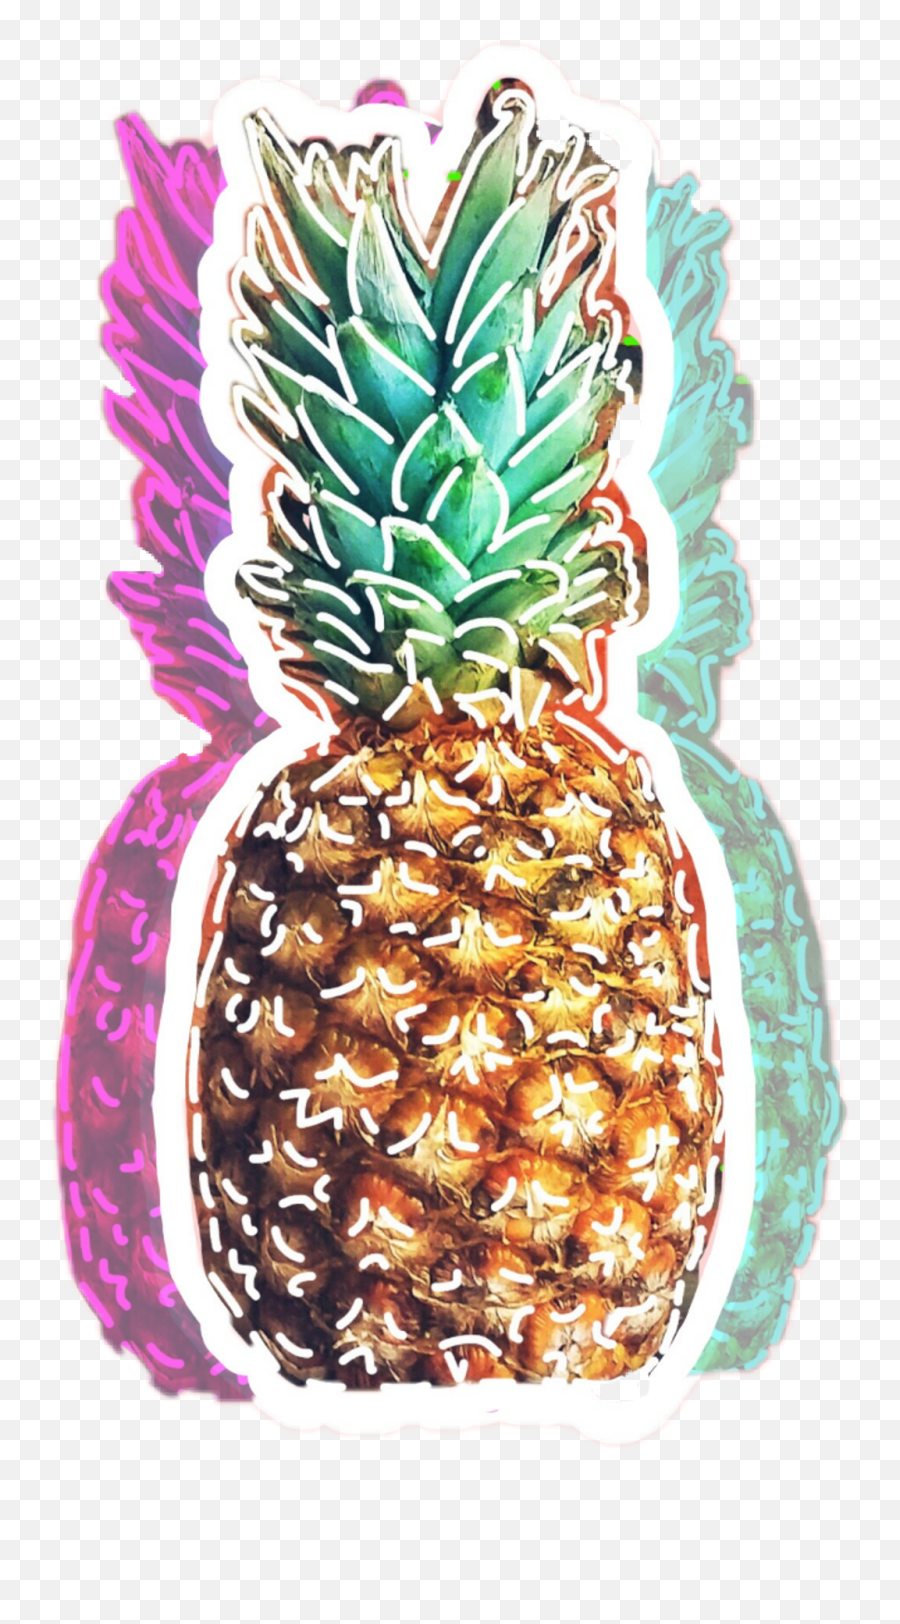 Download Pineapple Sticker - Pineapple Full Size Png Image Transparent Pineapple Stickers,Pineapple Png